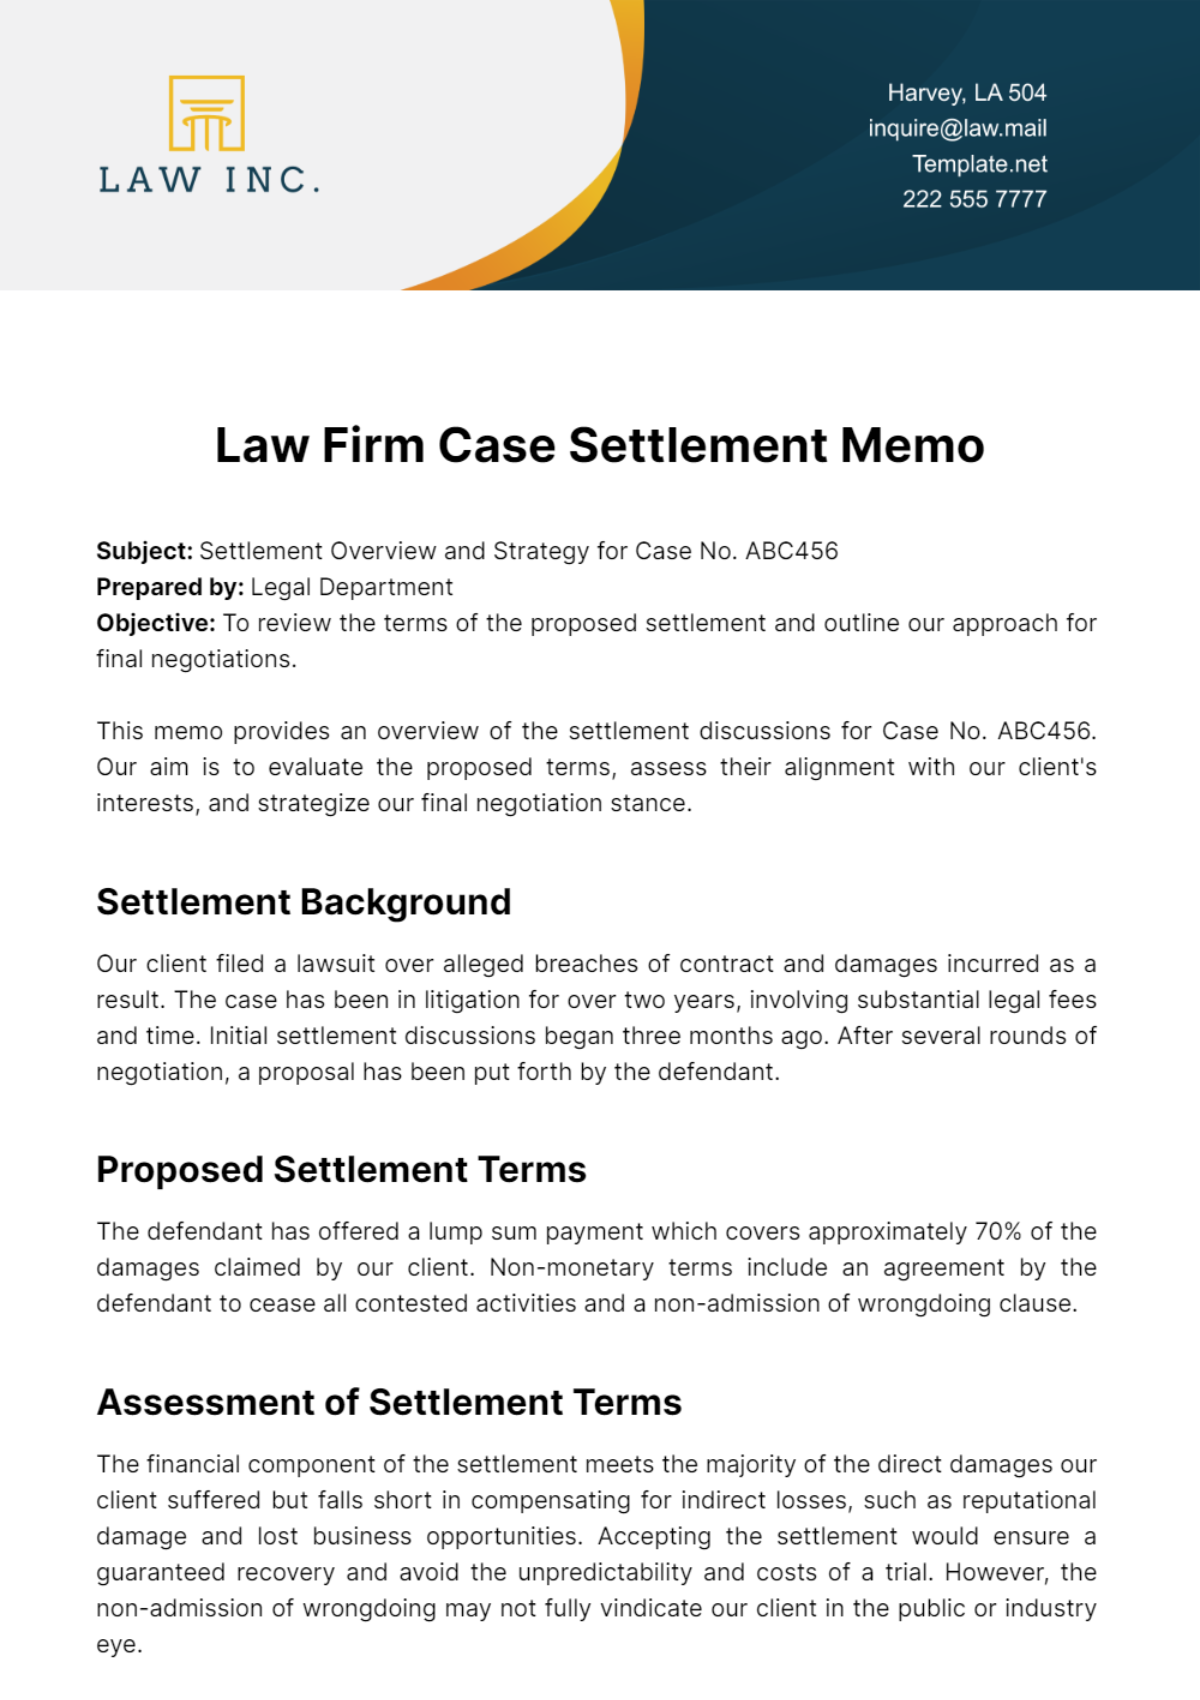 Free Law Firm Case Settlement Memo Template